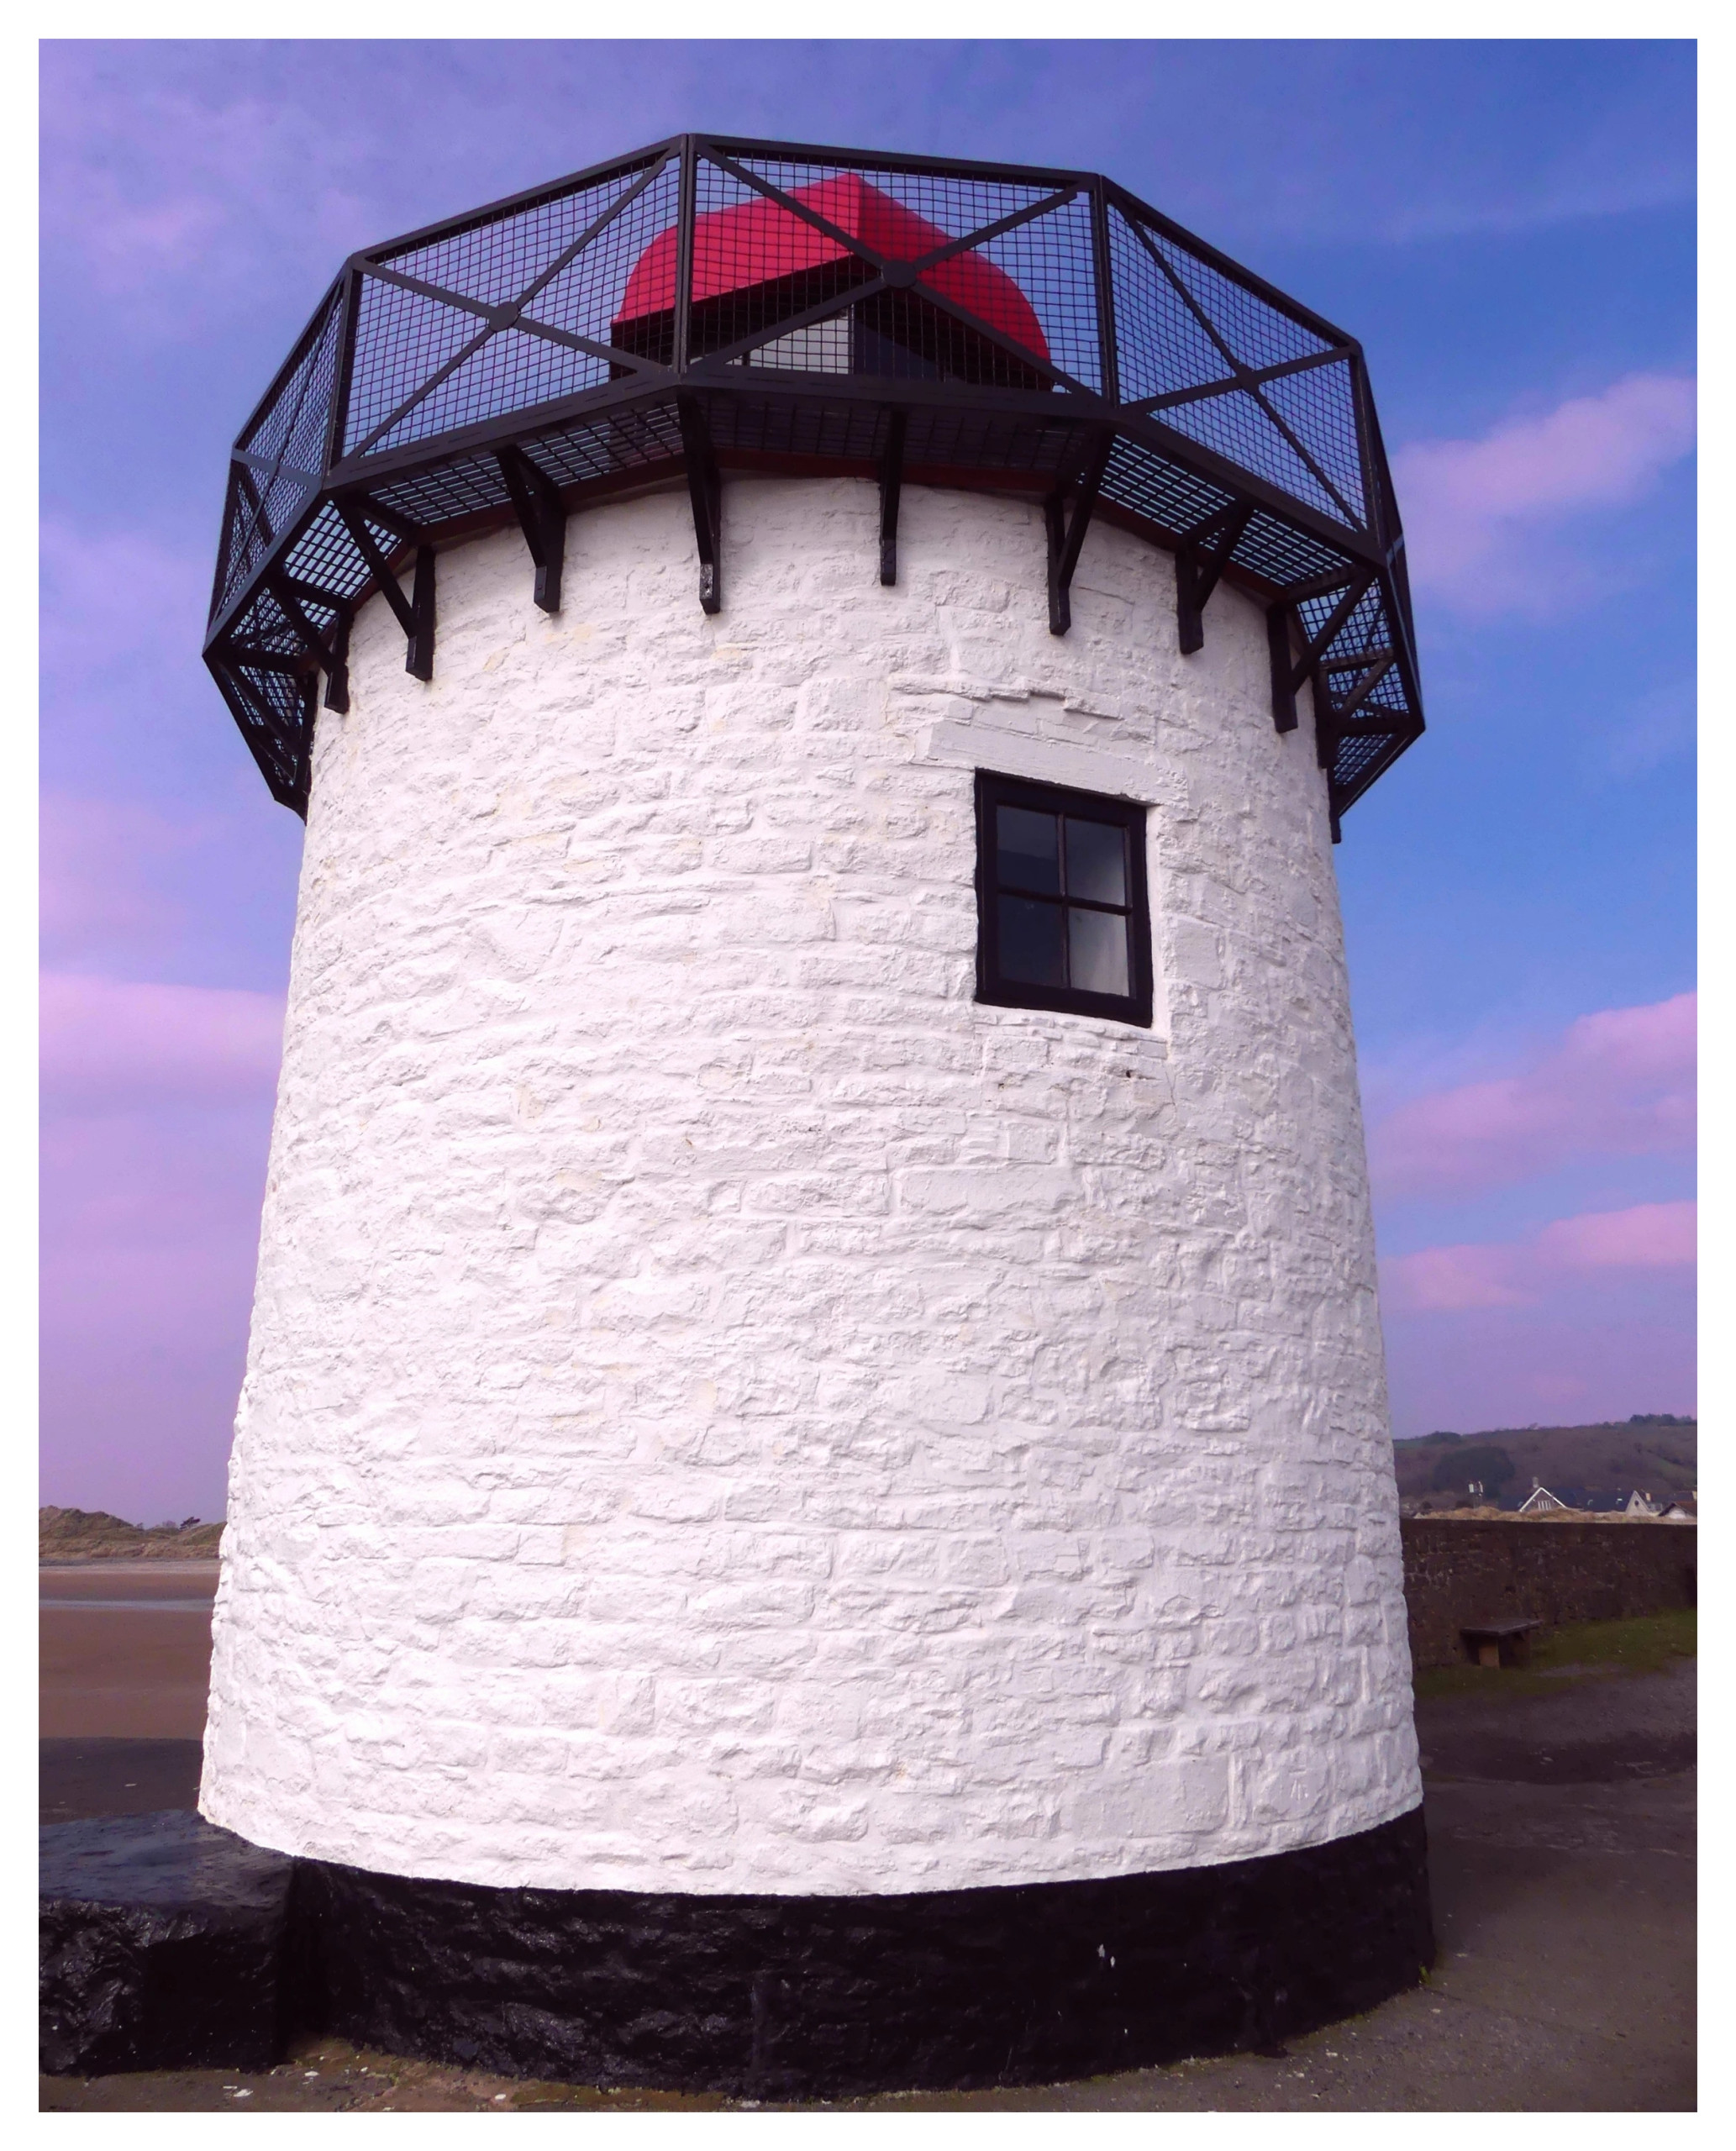 Image of white lighthouse with a red light on top.